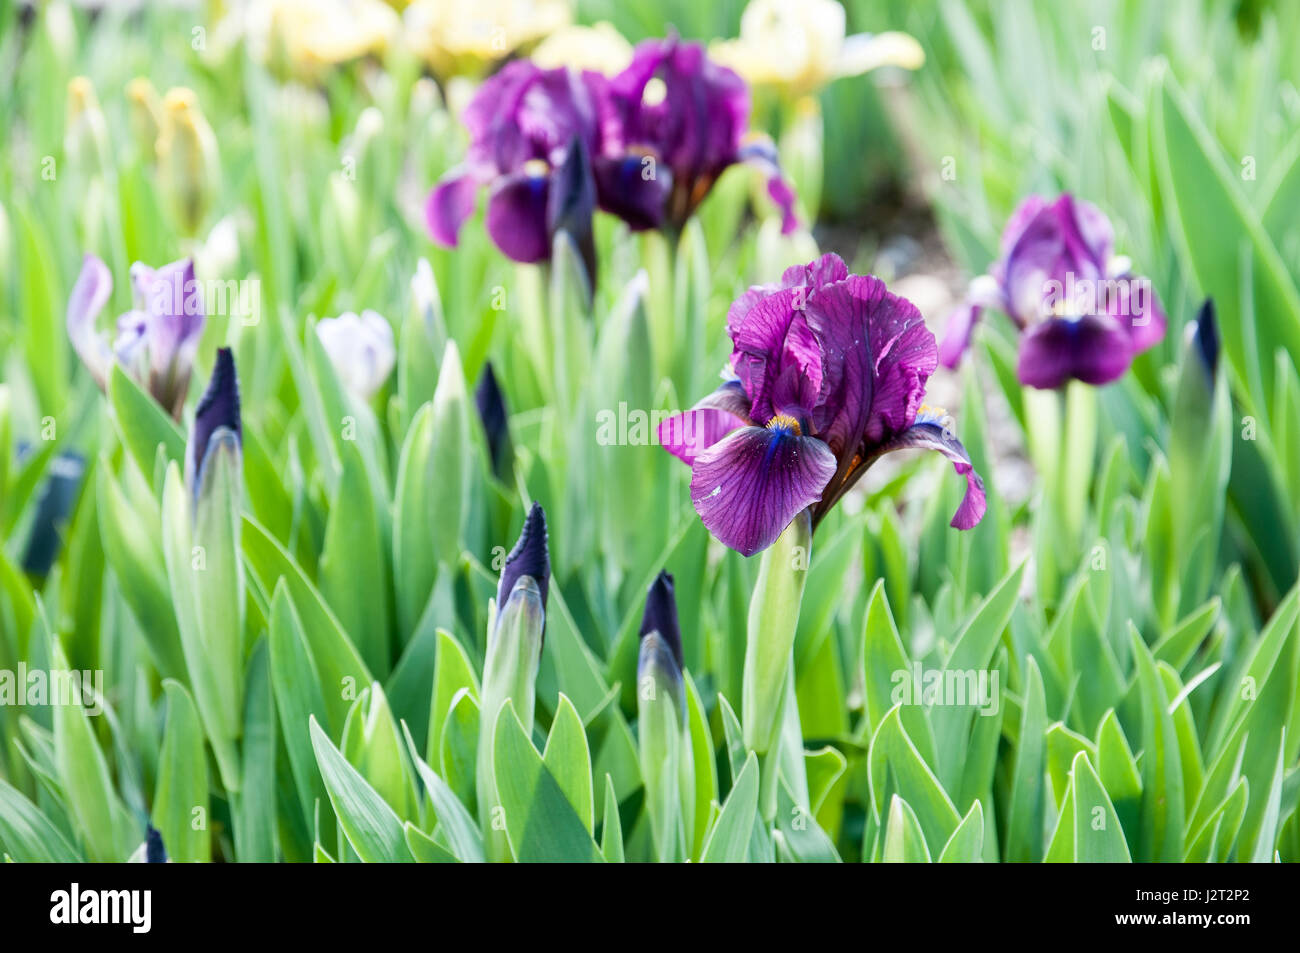 Iris is a genus of monocotyledonous plants of the Iridaceae family. The Latin name of the genus comes from the Greek goddess Stock Photo